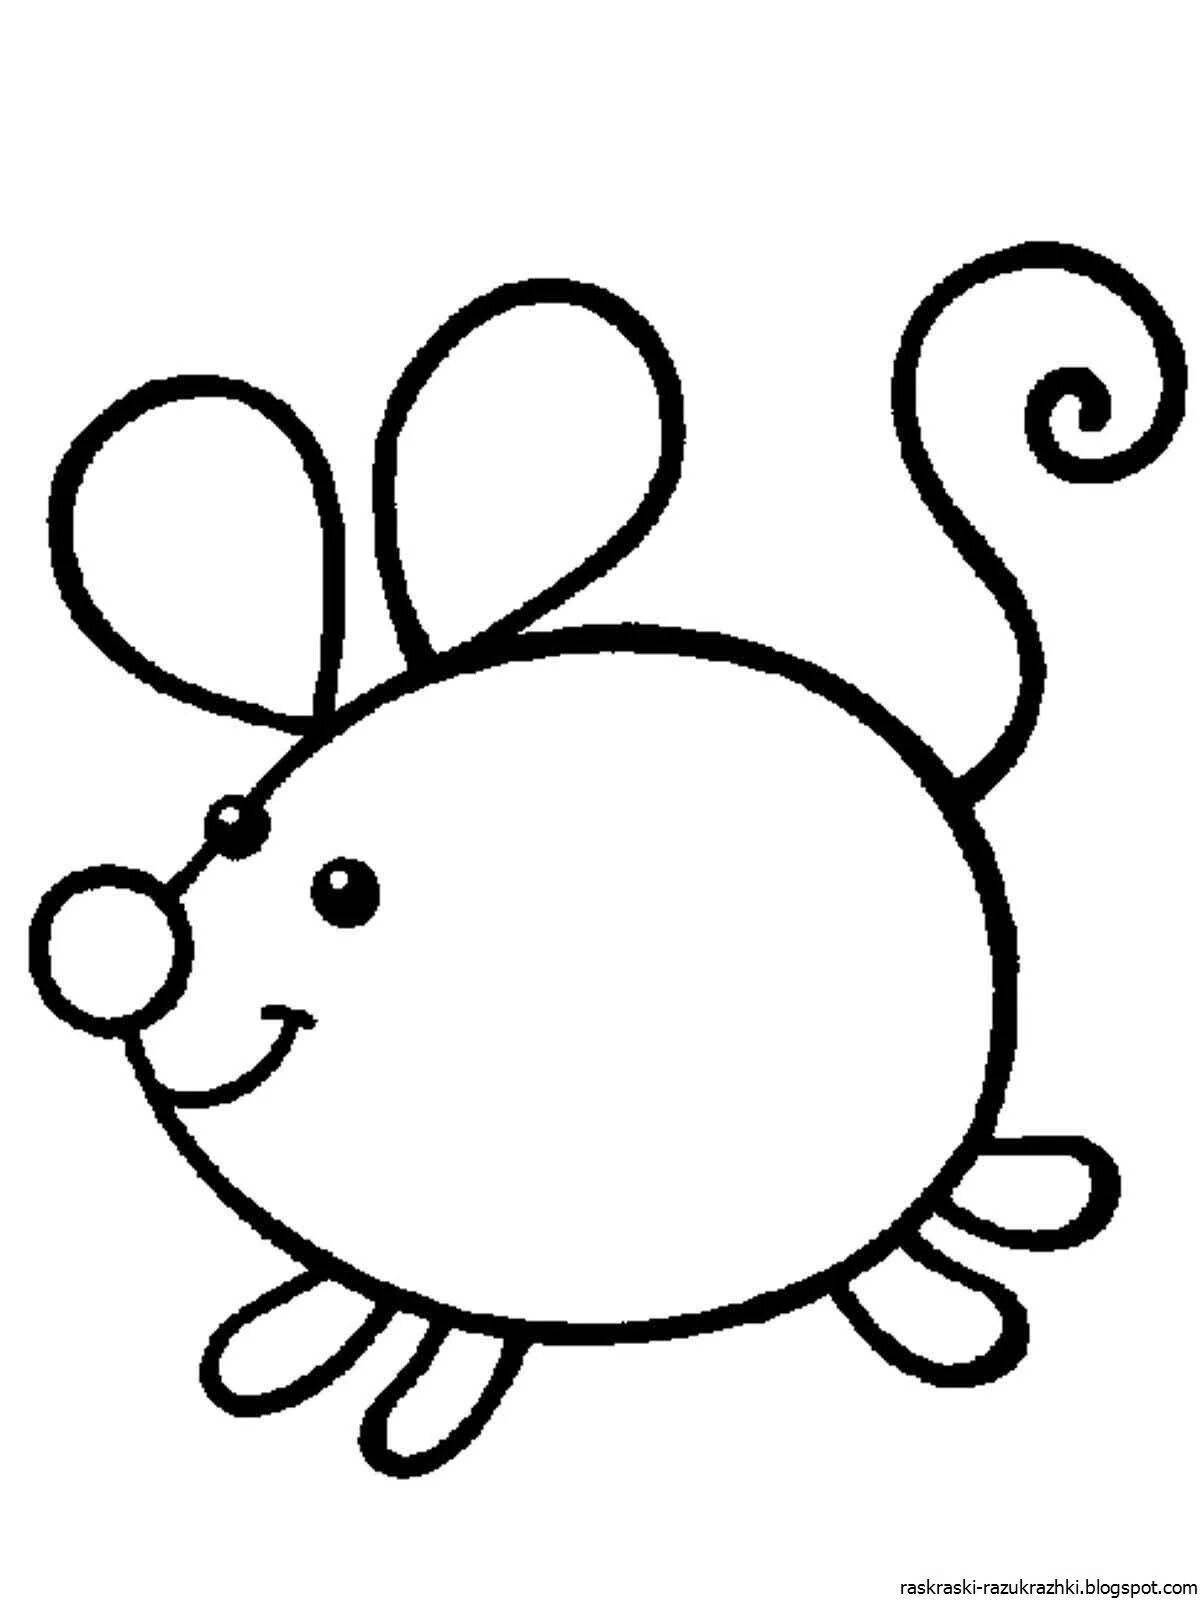 Color-joious coloring page simple for children 4-5 years old